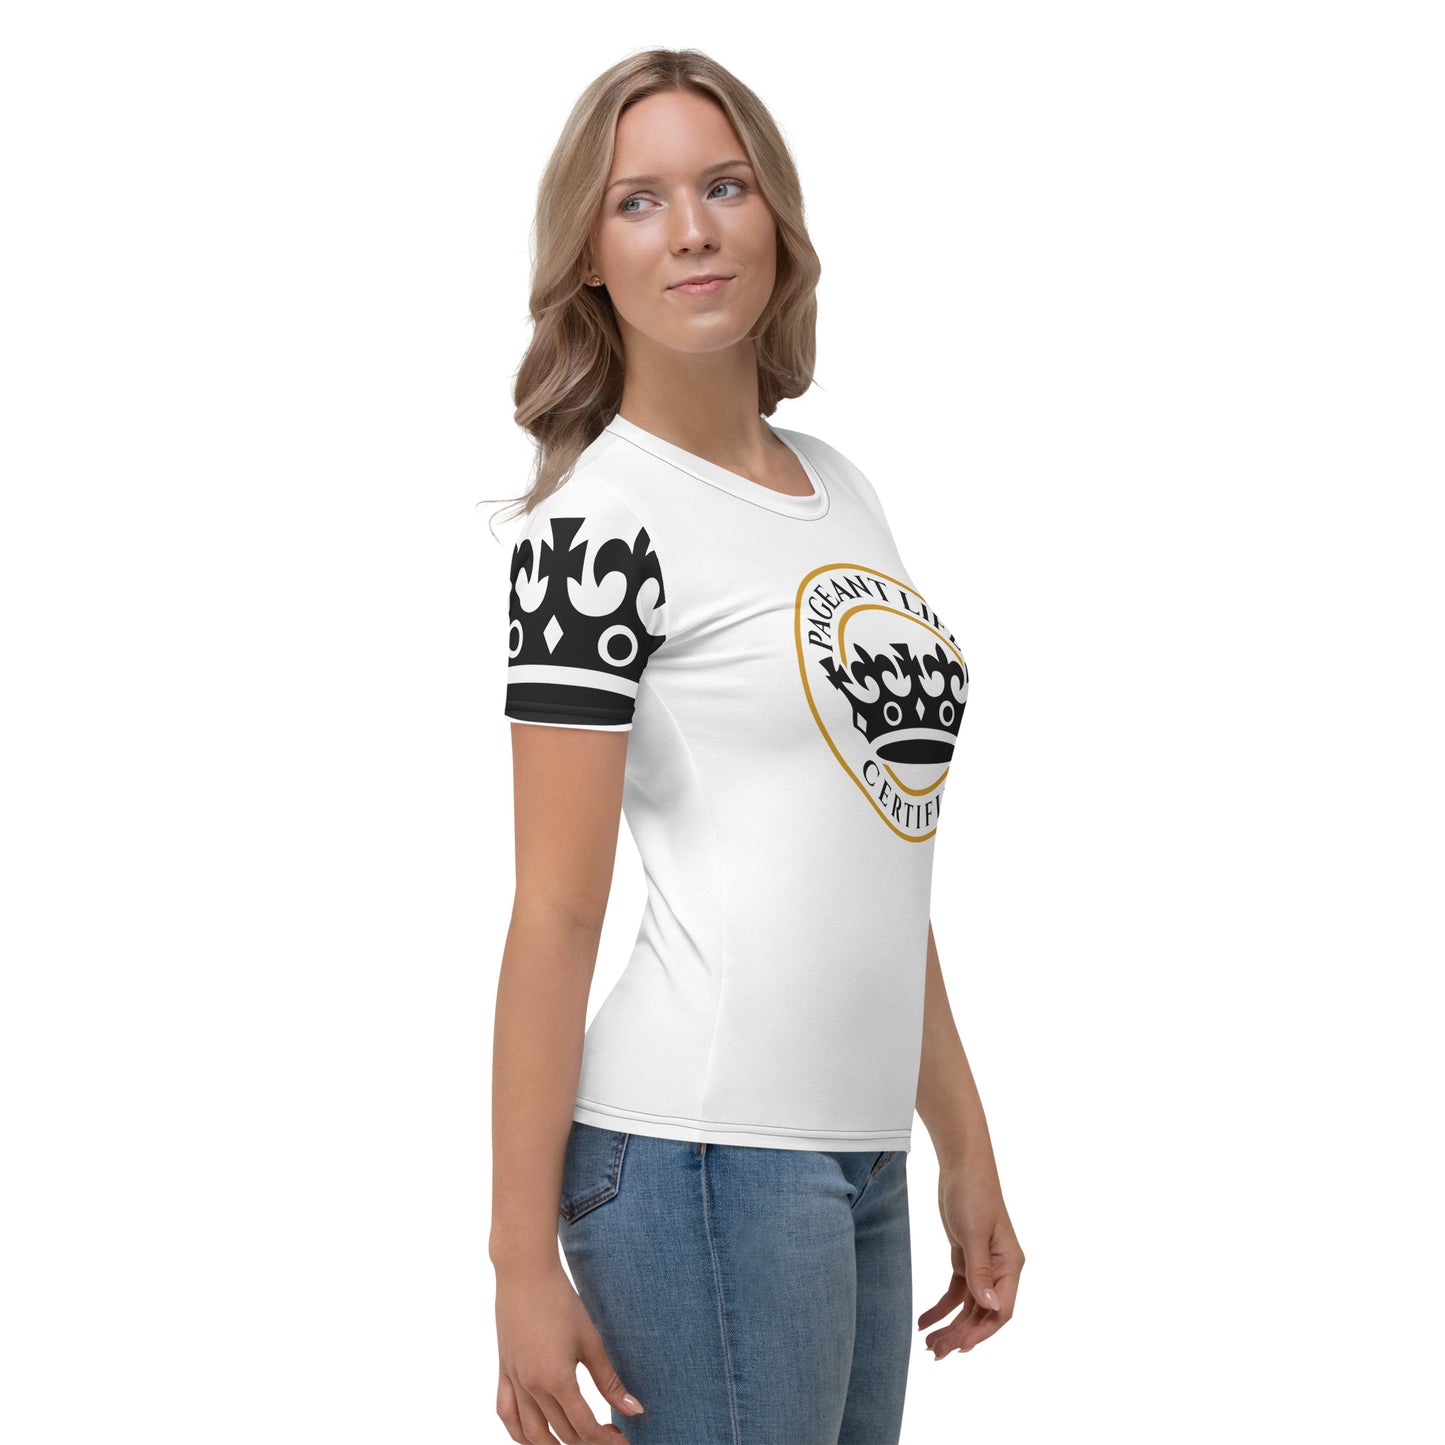 Black and Gold/ White Pageant Life Certified Women's T-shirt